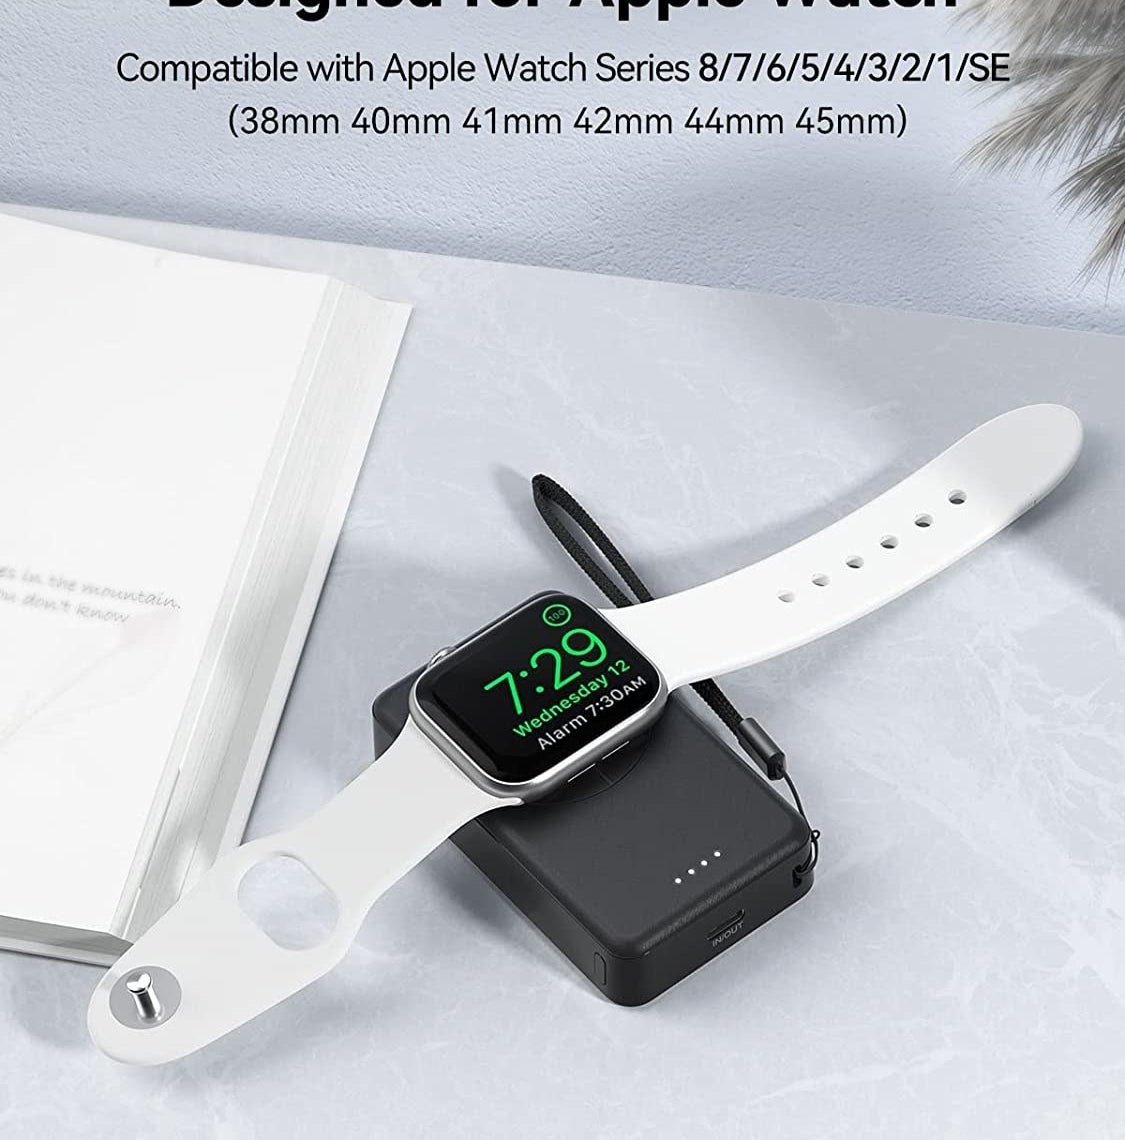 An Apple watch on the charger